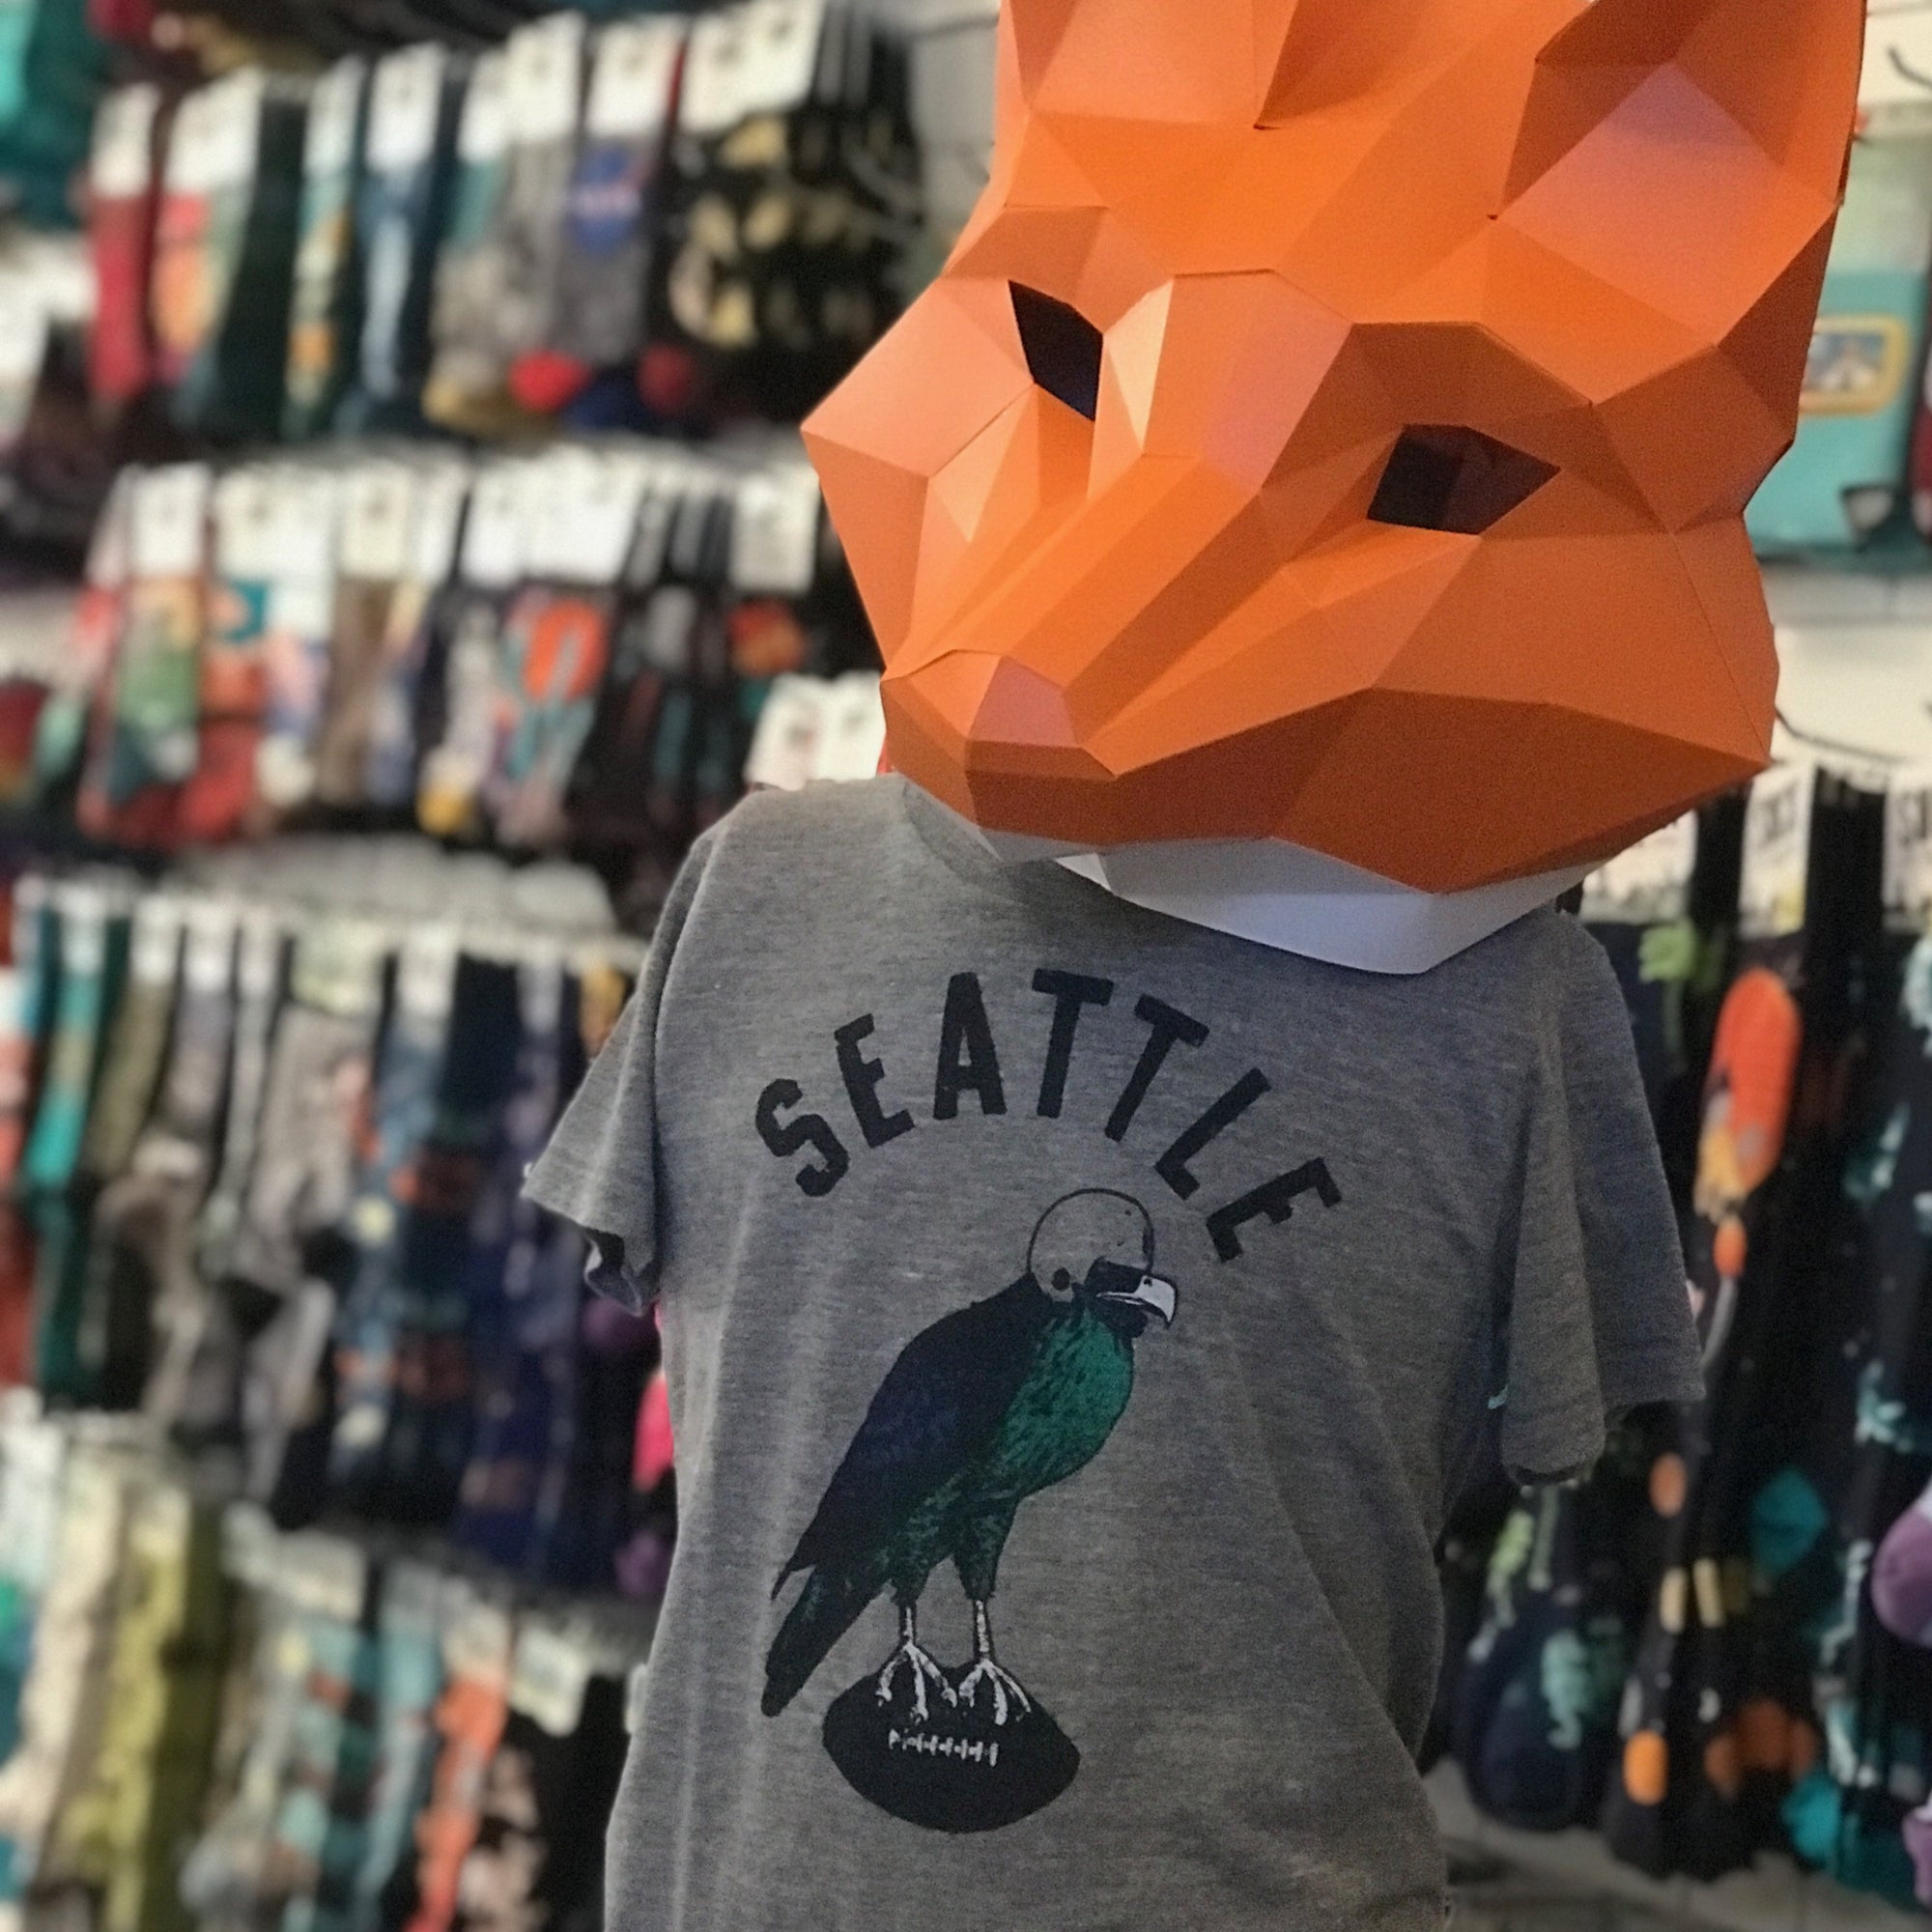 A heather gray shirt that says SEATTLE in block letters. Below there is a seahawk wearing a helmet and standing on a football. It is shown on a mannequin wearing an orange fox mask made of paper. In the background there is a wall of socks blurred.